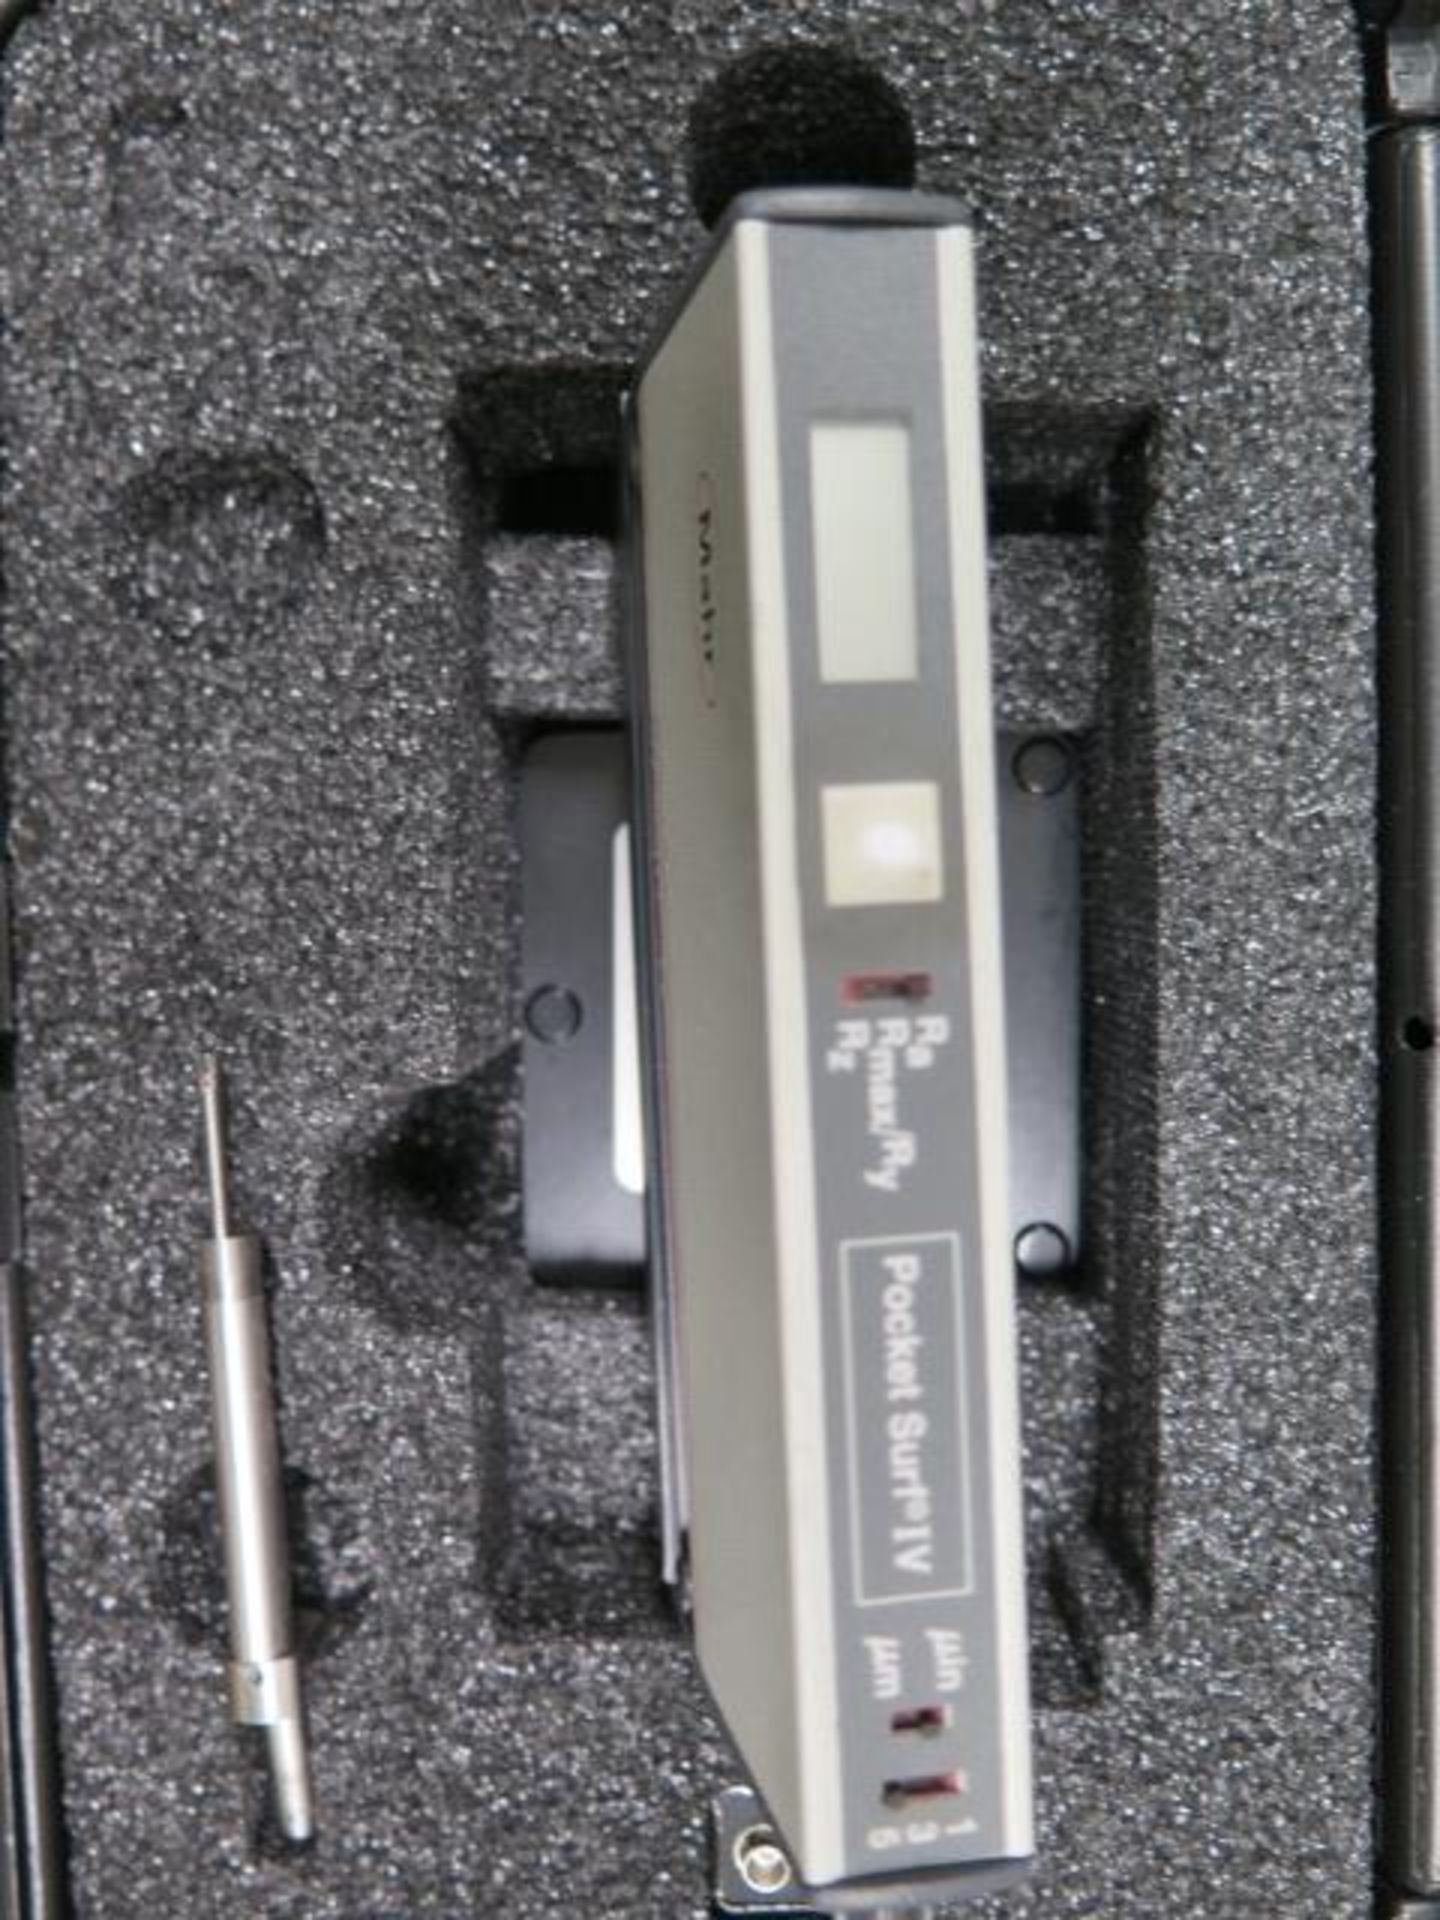 Mahr "Pocket Surf VI" Digital Surface Roughness Gage (SOLD AS-IS - NO WARRANTY) - Image 6 of 6